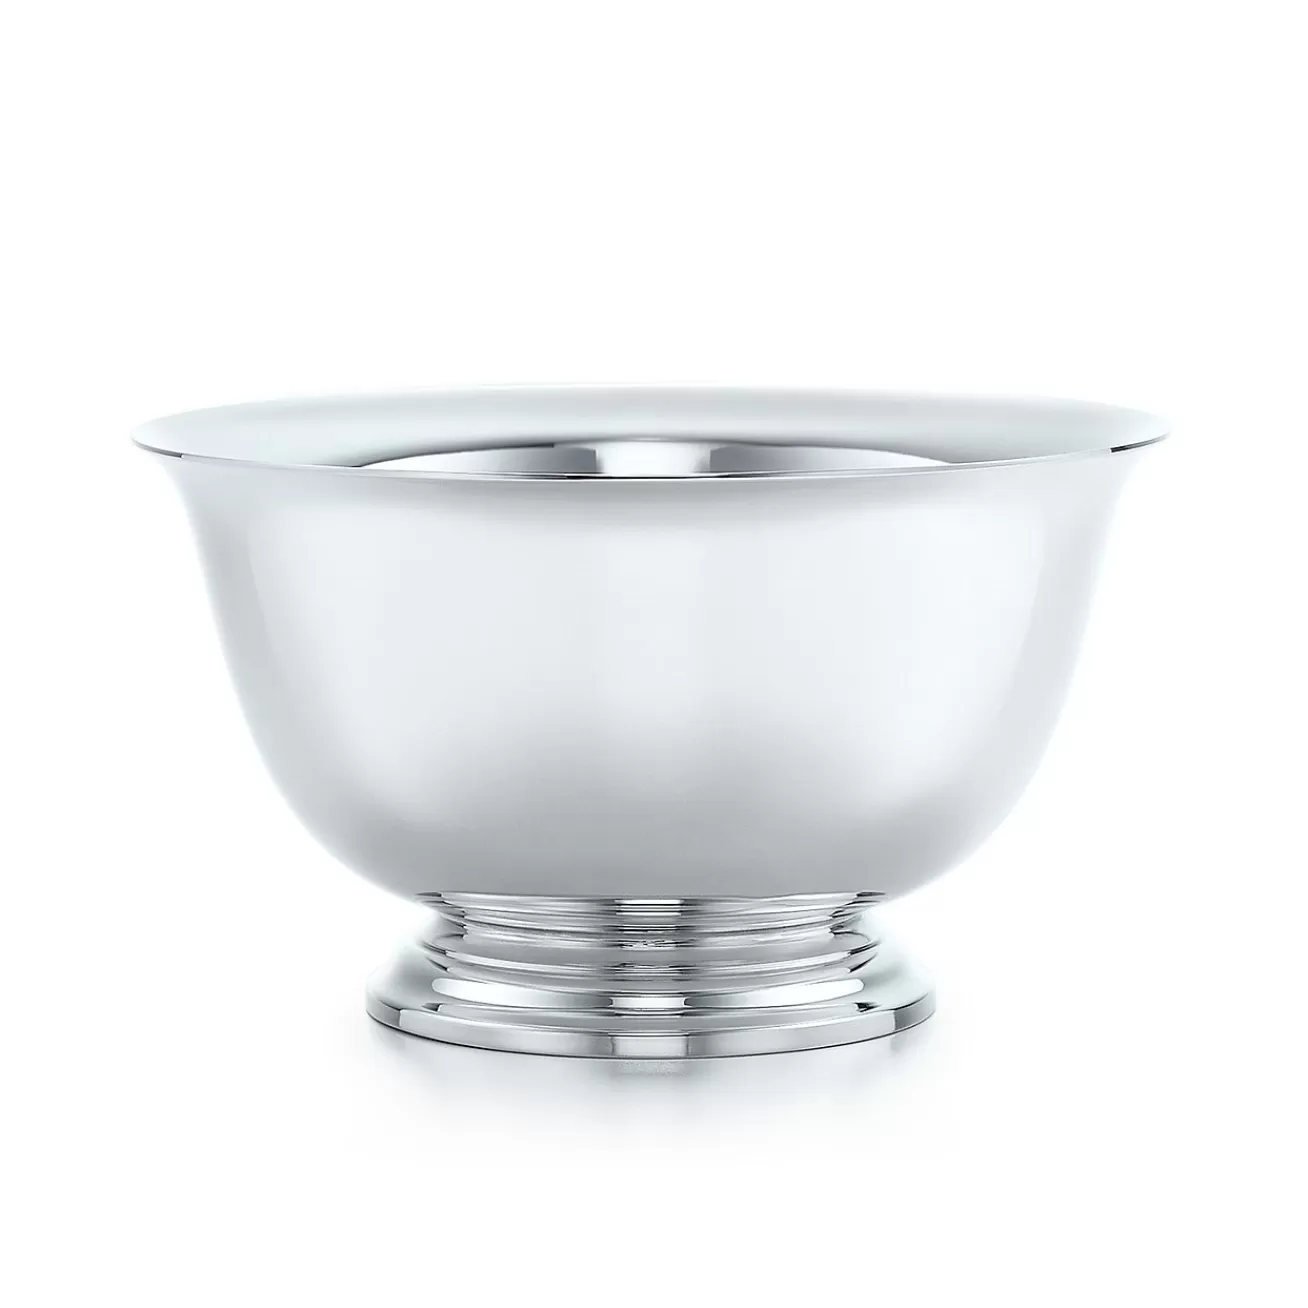 Tiffany & Co. Revere bowl in sterling silver. | ^ The Couple | Wedding Gifts